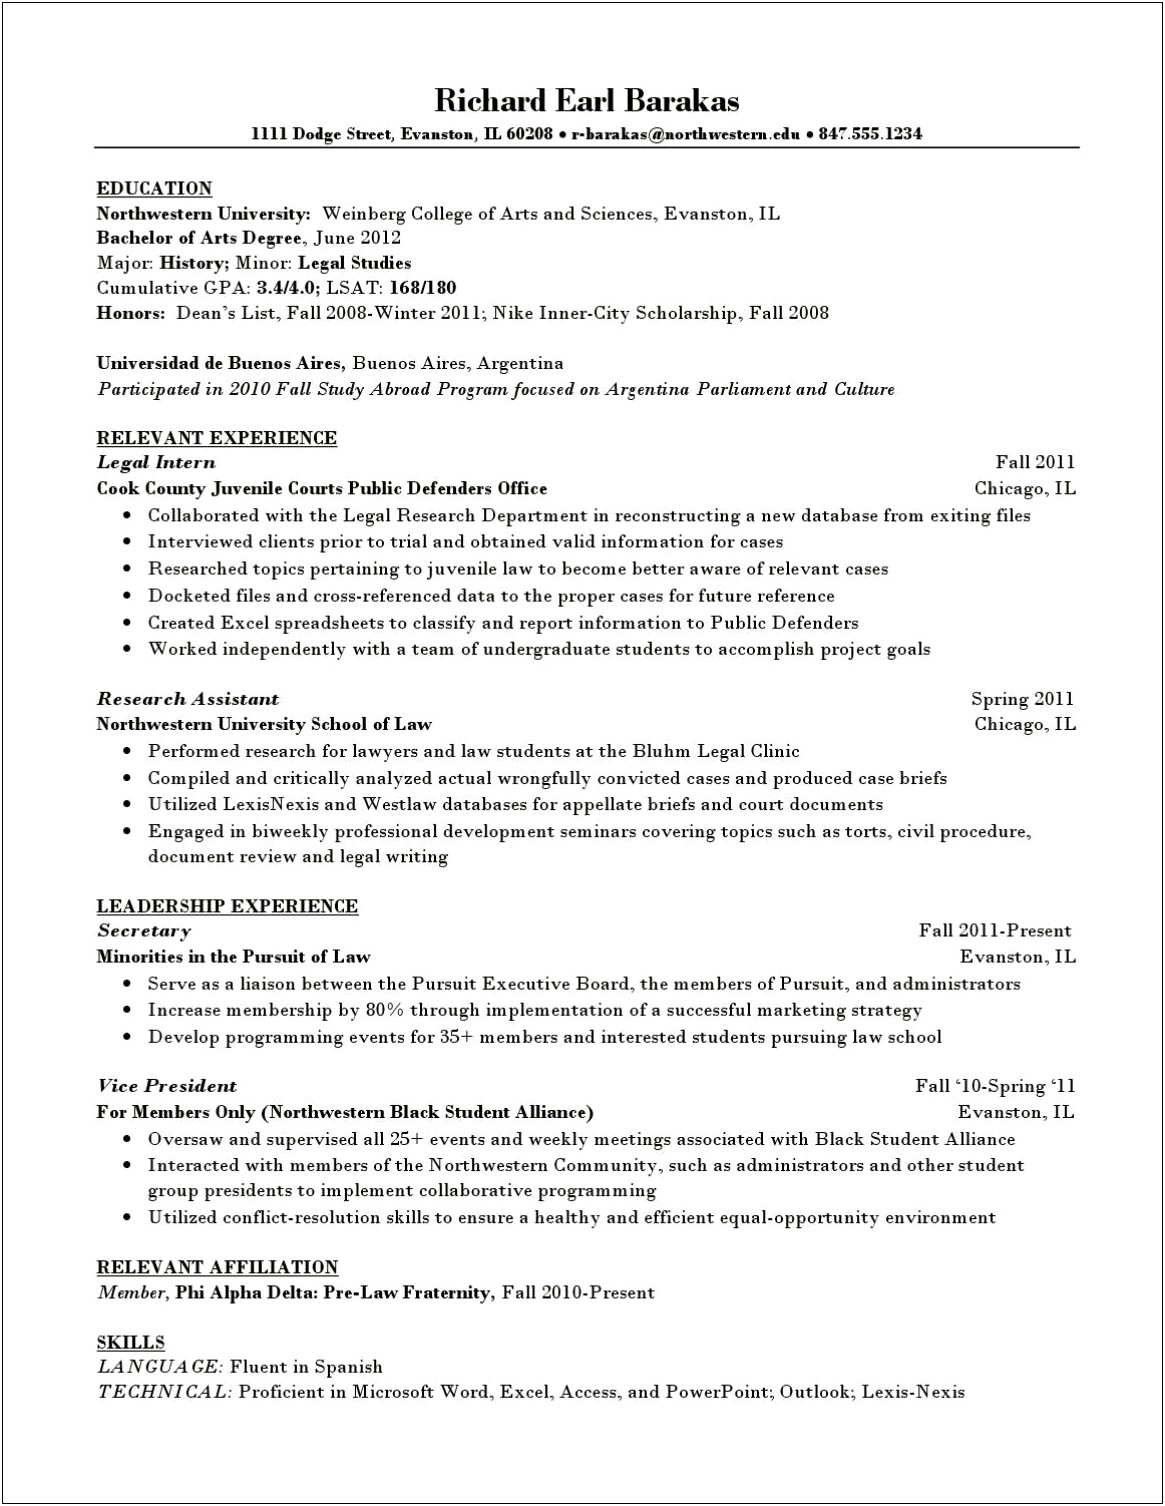 Skill Section For Law Students On Resume